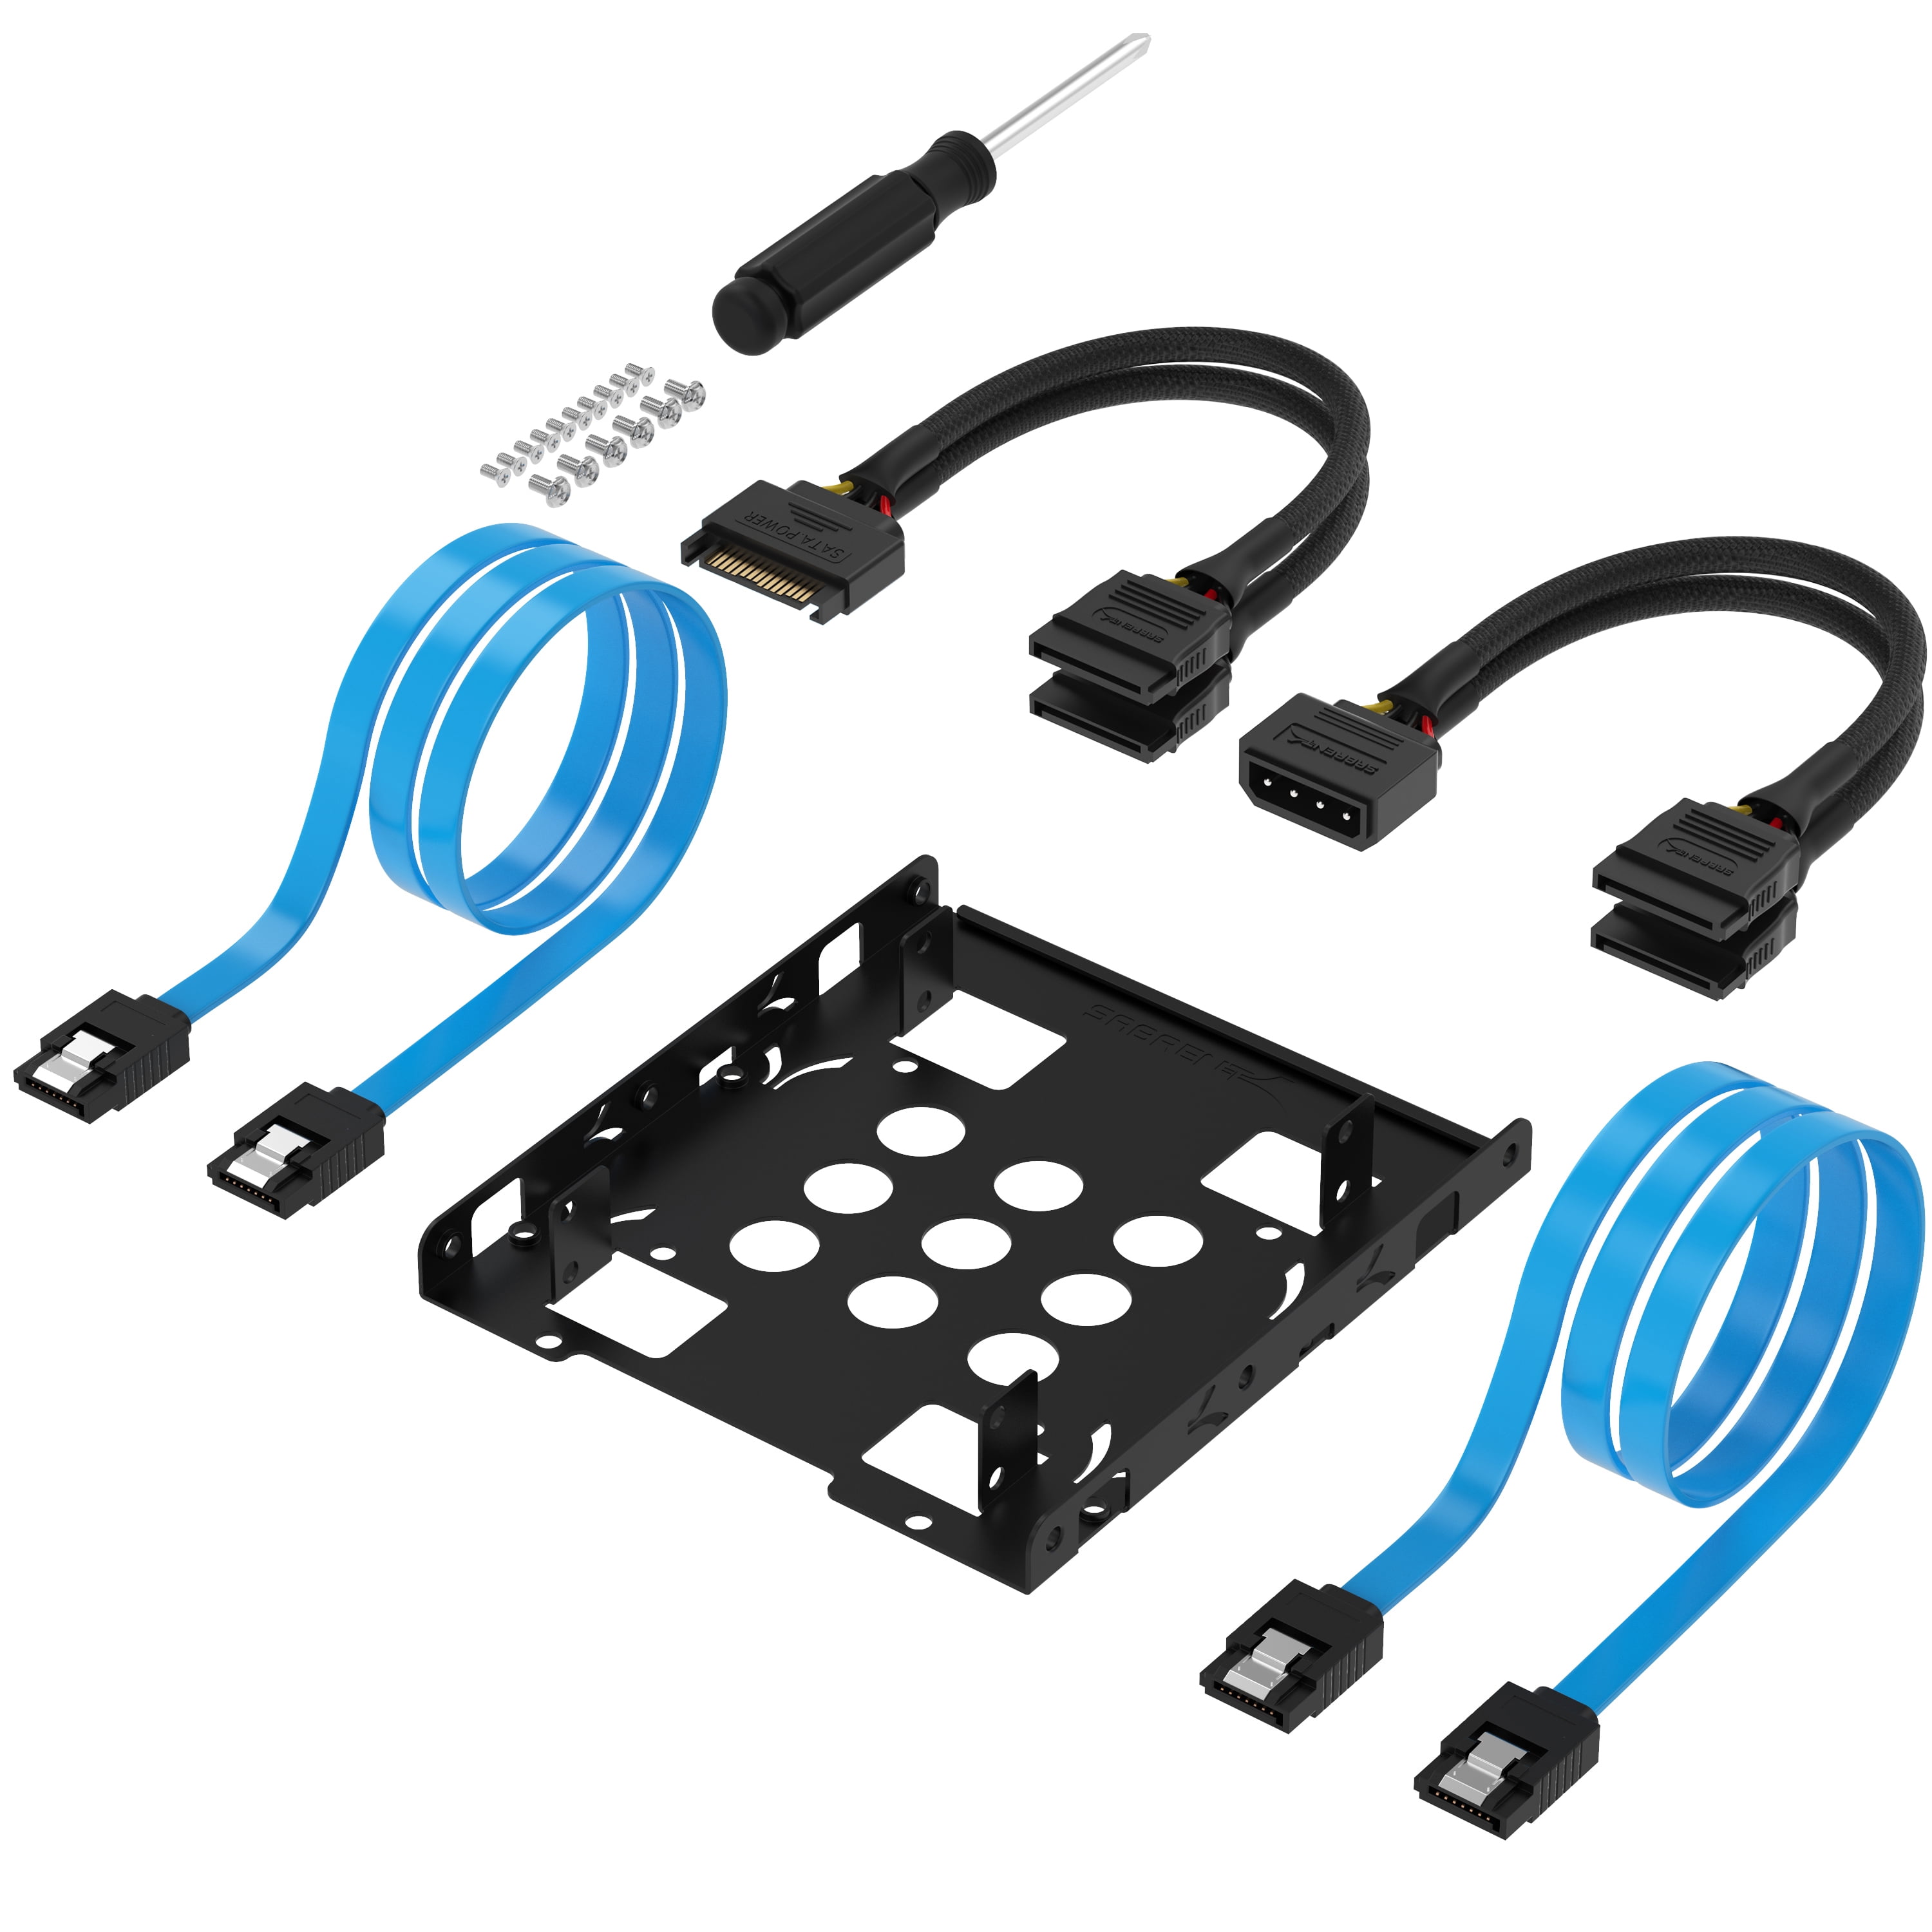 3.5-Inch to x2 SSD / 2.5-Inch Internal Hard Drive Mounting and Power Cables Included] (BK-HDCC) - Walmart.com